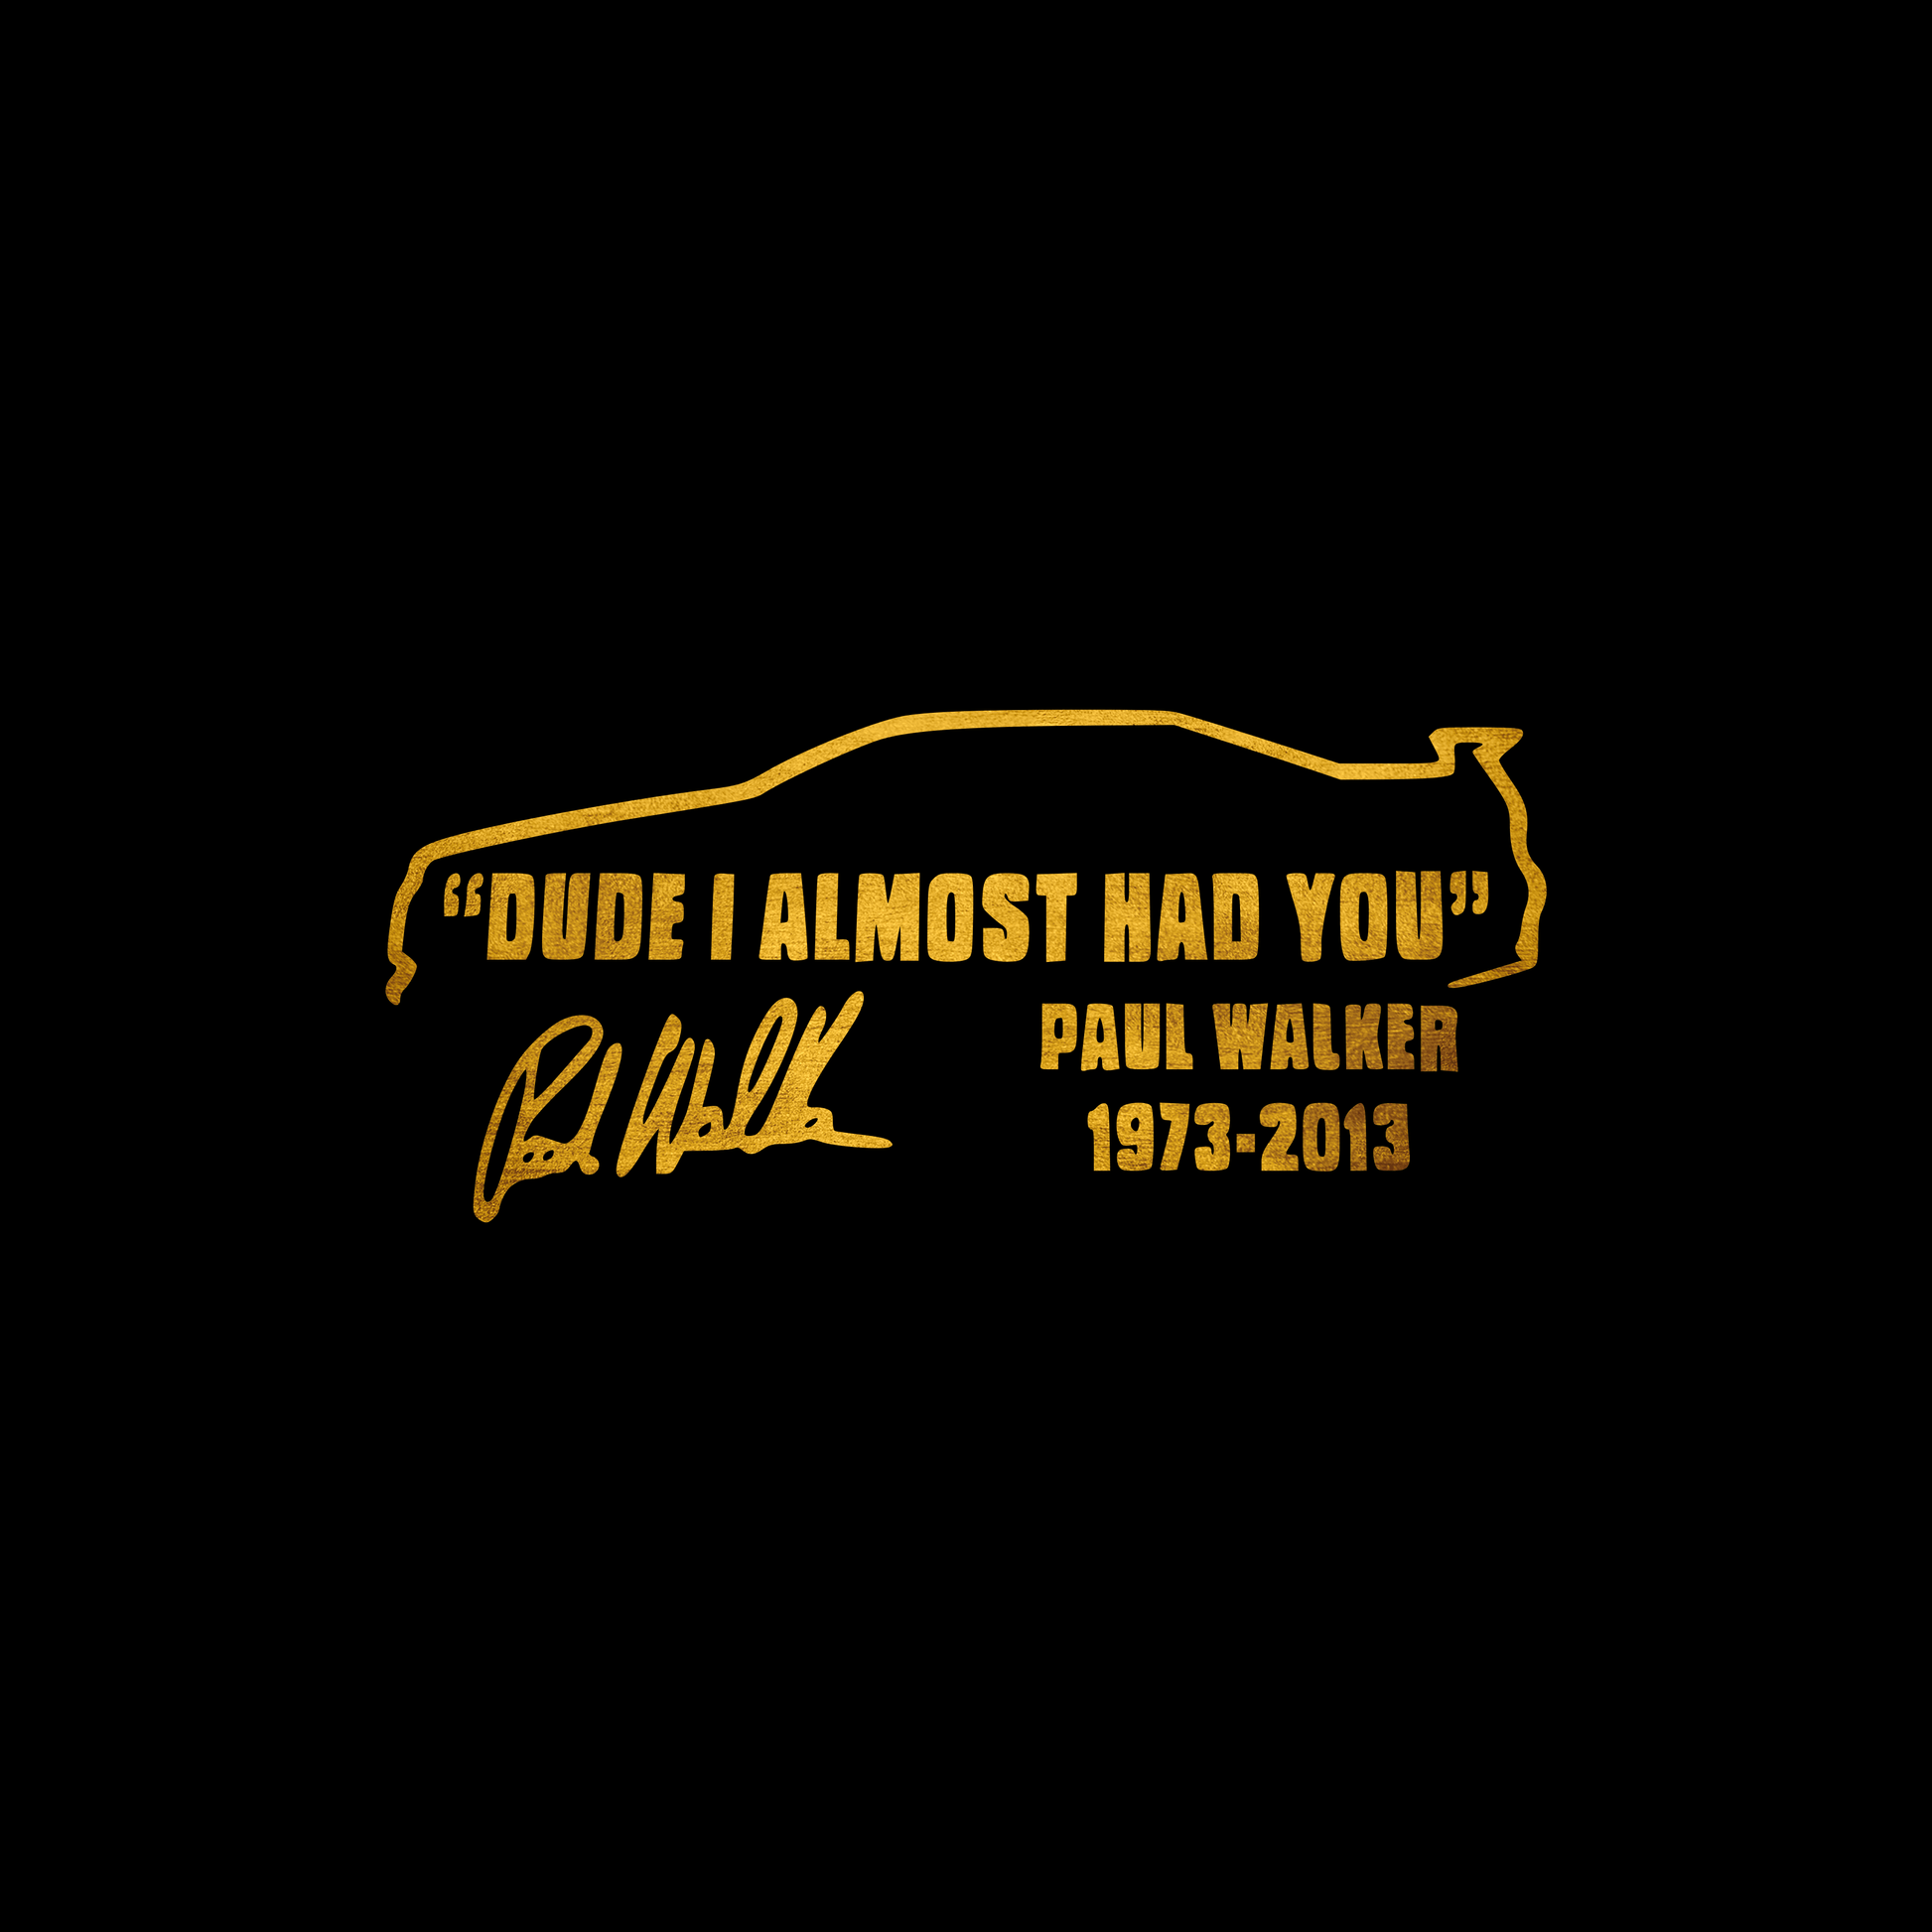 Dude, I almost had you! sticker decal